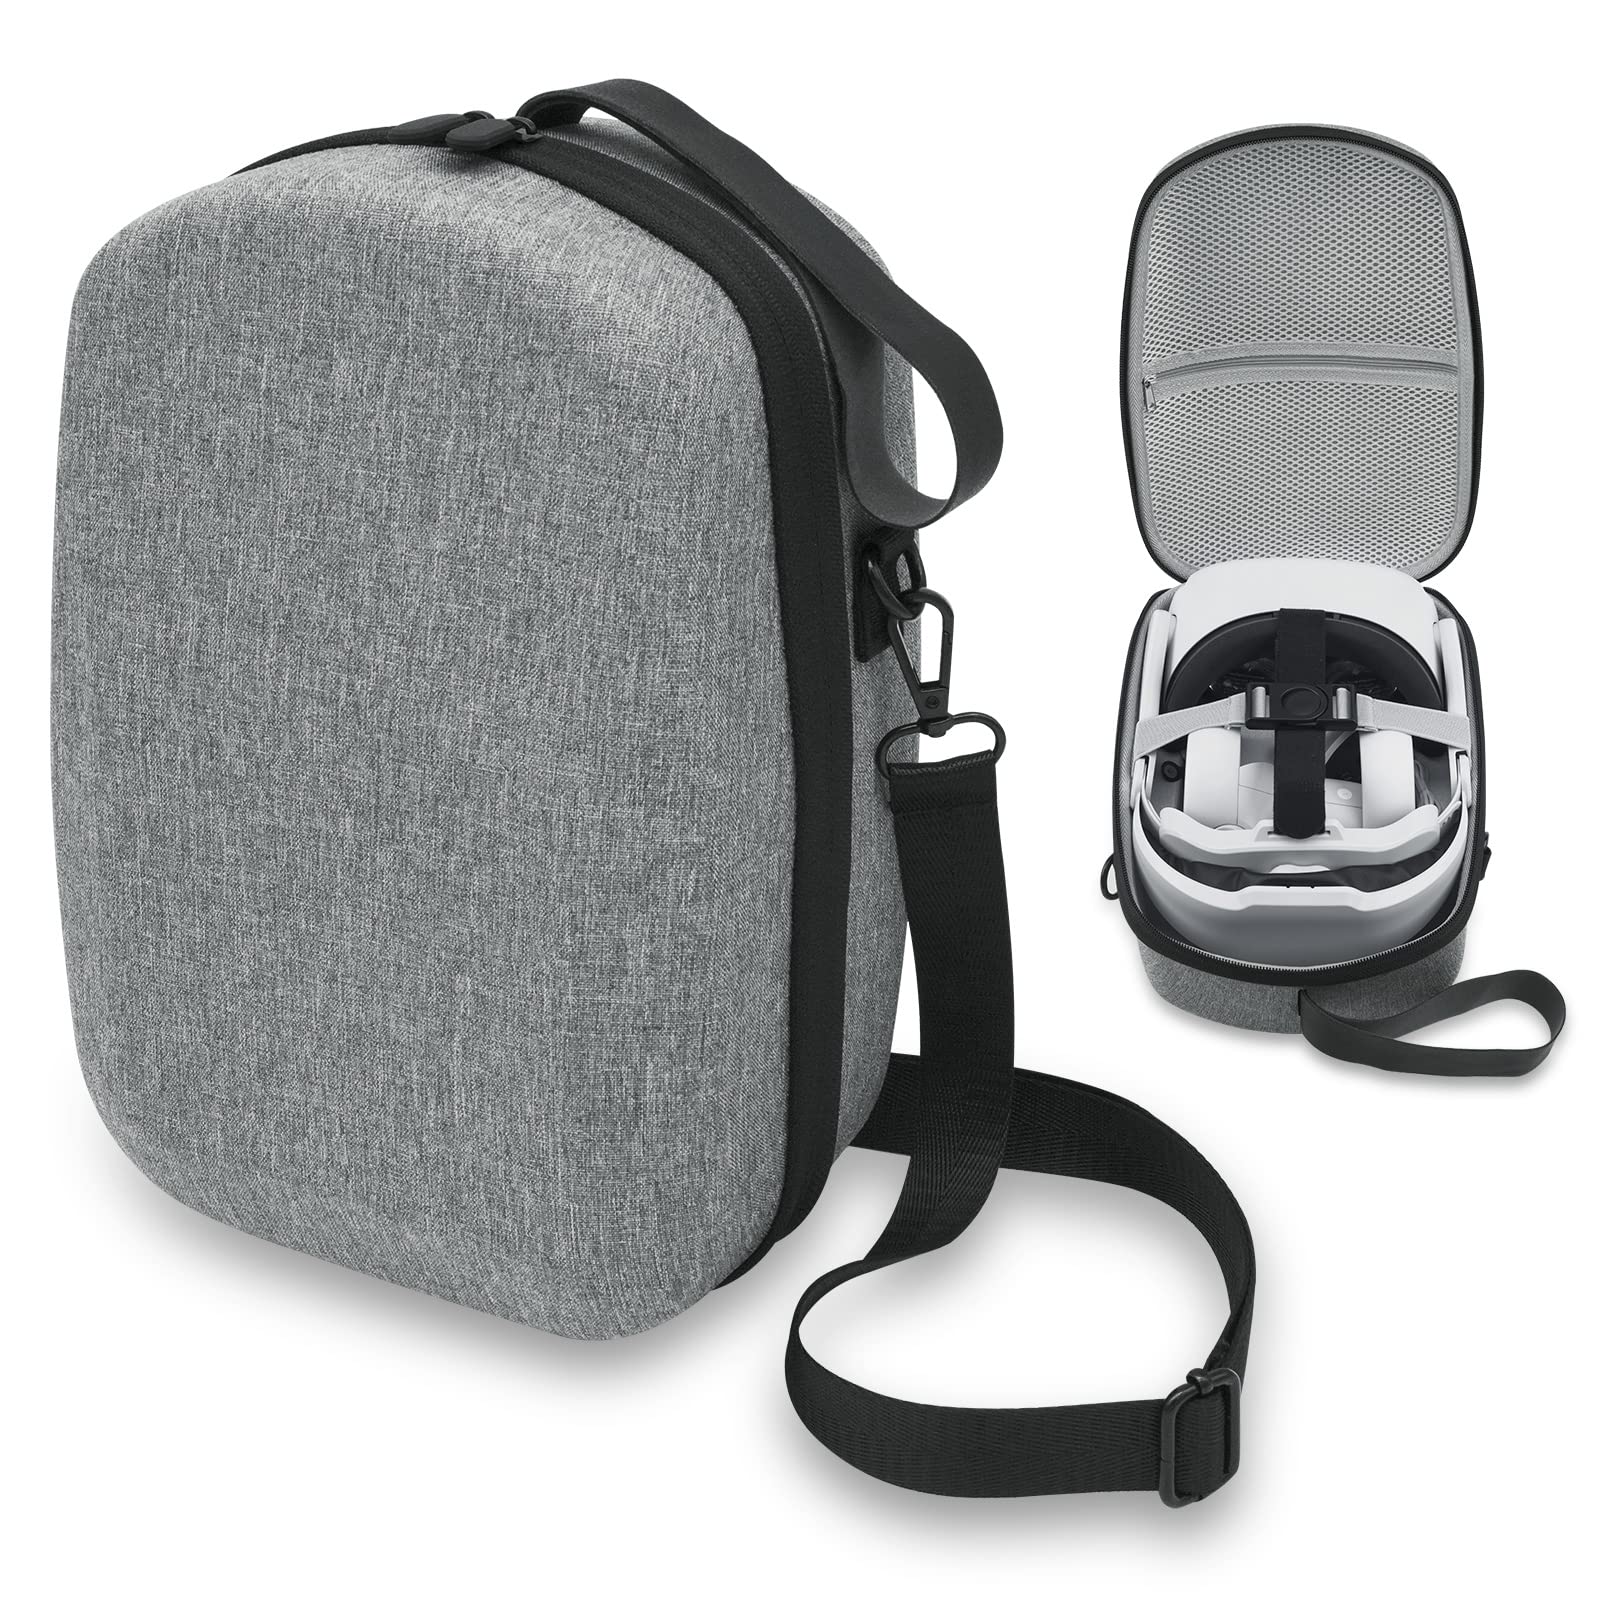 YOGES VR Hard Carrying Case for Meta Oculus Quest 2